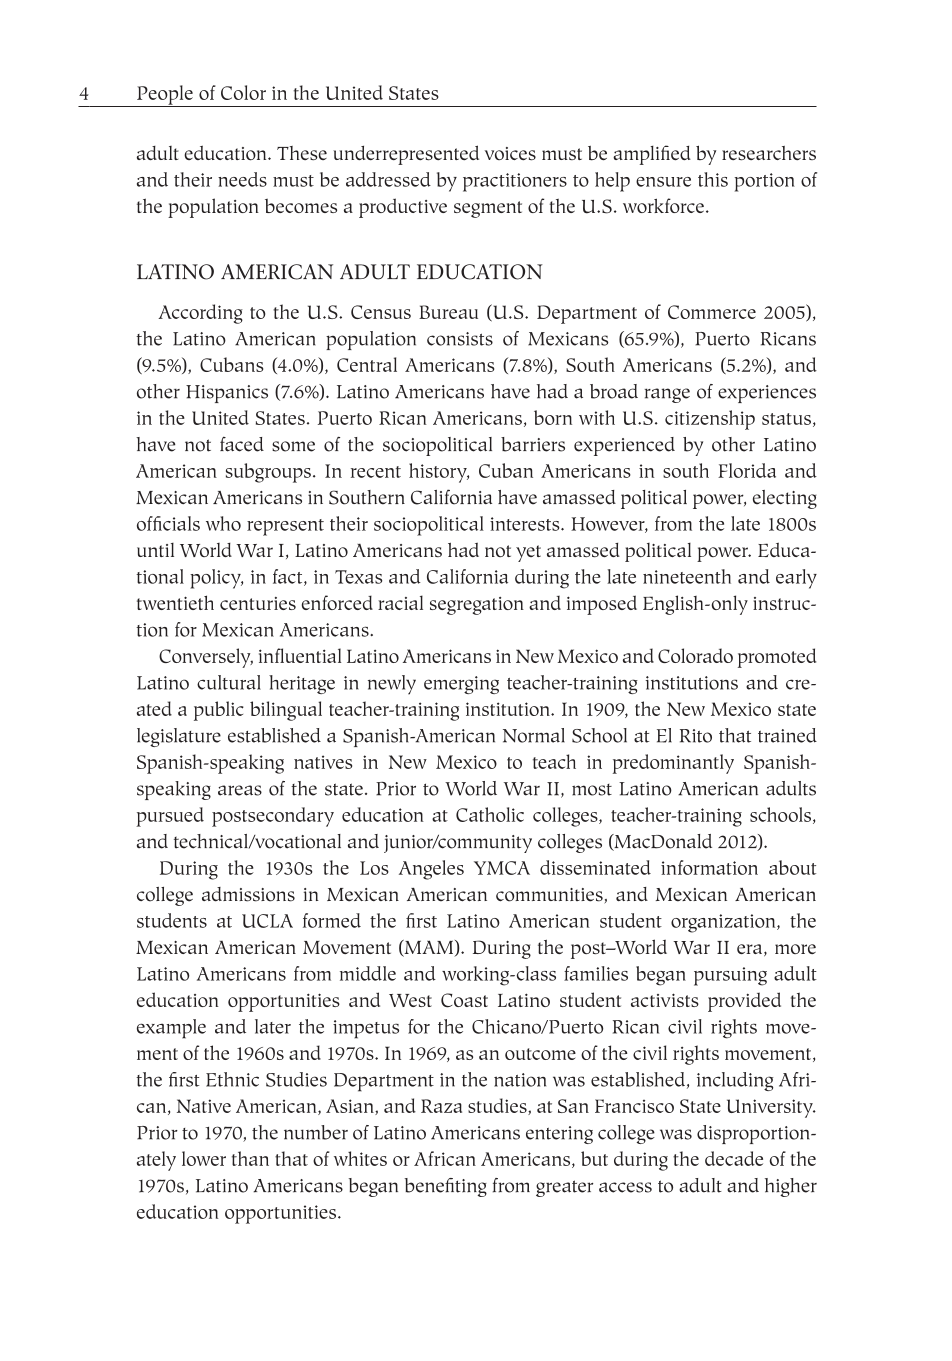 People of Color in the United States: Contemporary Issues in Education, Work, Communities, Health, and Immigration [4 volumes] page 1:4